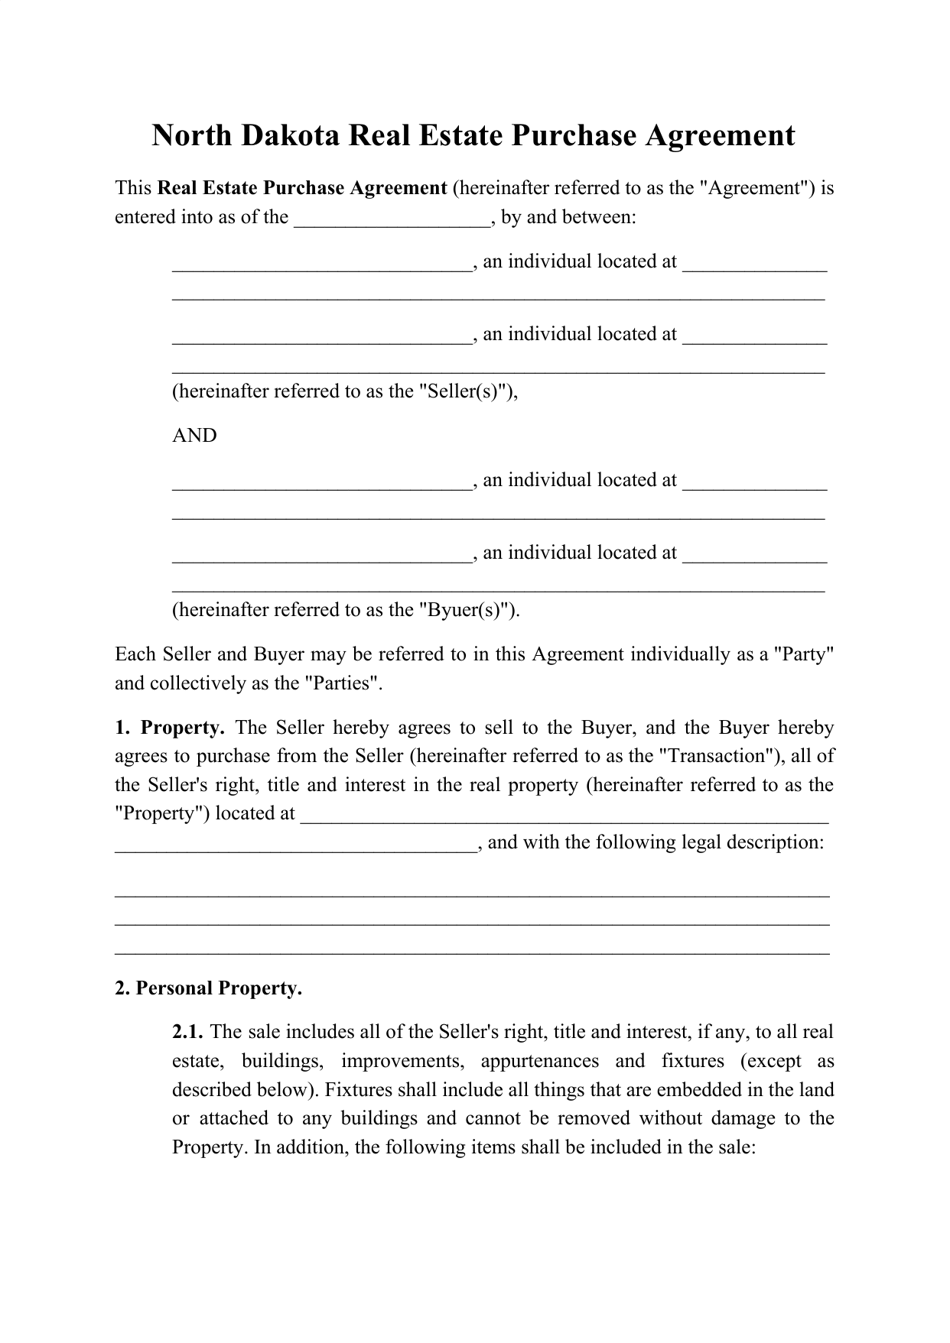 Real Estate Purchase Agreement Template - North Dakota, Page 1